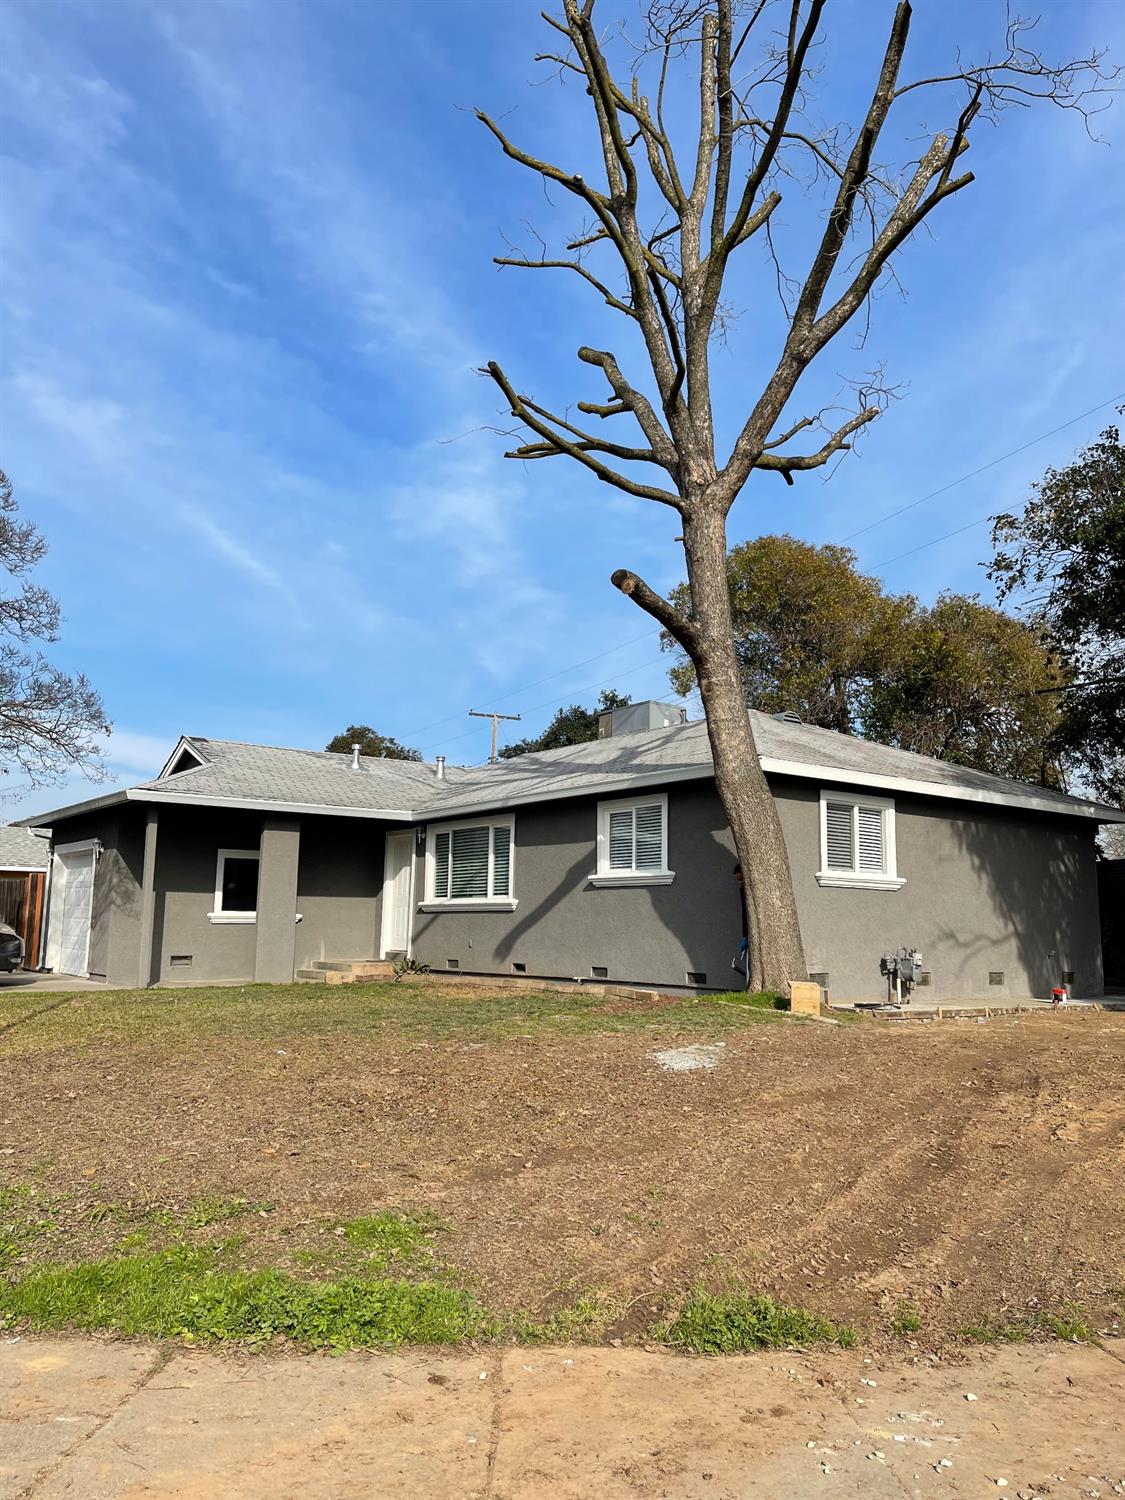 Great opportunity to own a beautiful remodel home in Fruitridge Terrace neighborhood. New Flooring, New Bathroom, New Kitchen, and more. Located on a huge corner lot and tucked away on a quiet street! Spacious kitchen with enough room to add an island, sizable bedrooms, and plenty of space for the family to gather together. Priced to sell!